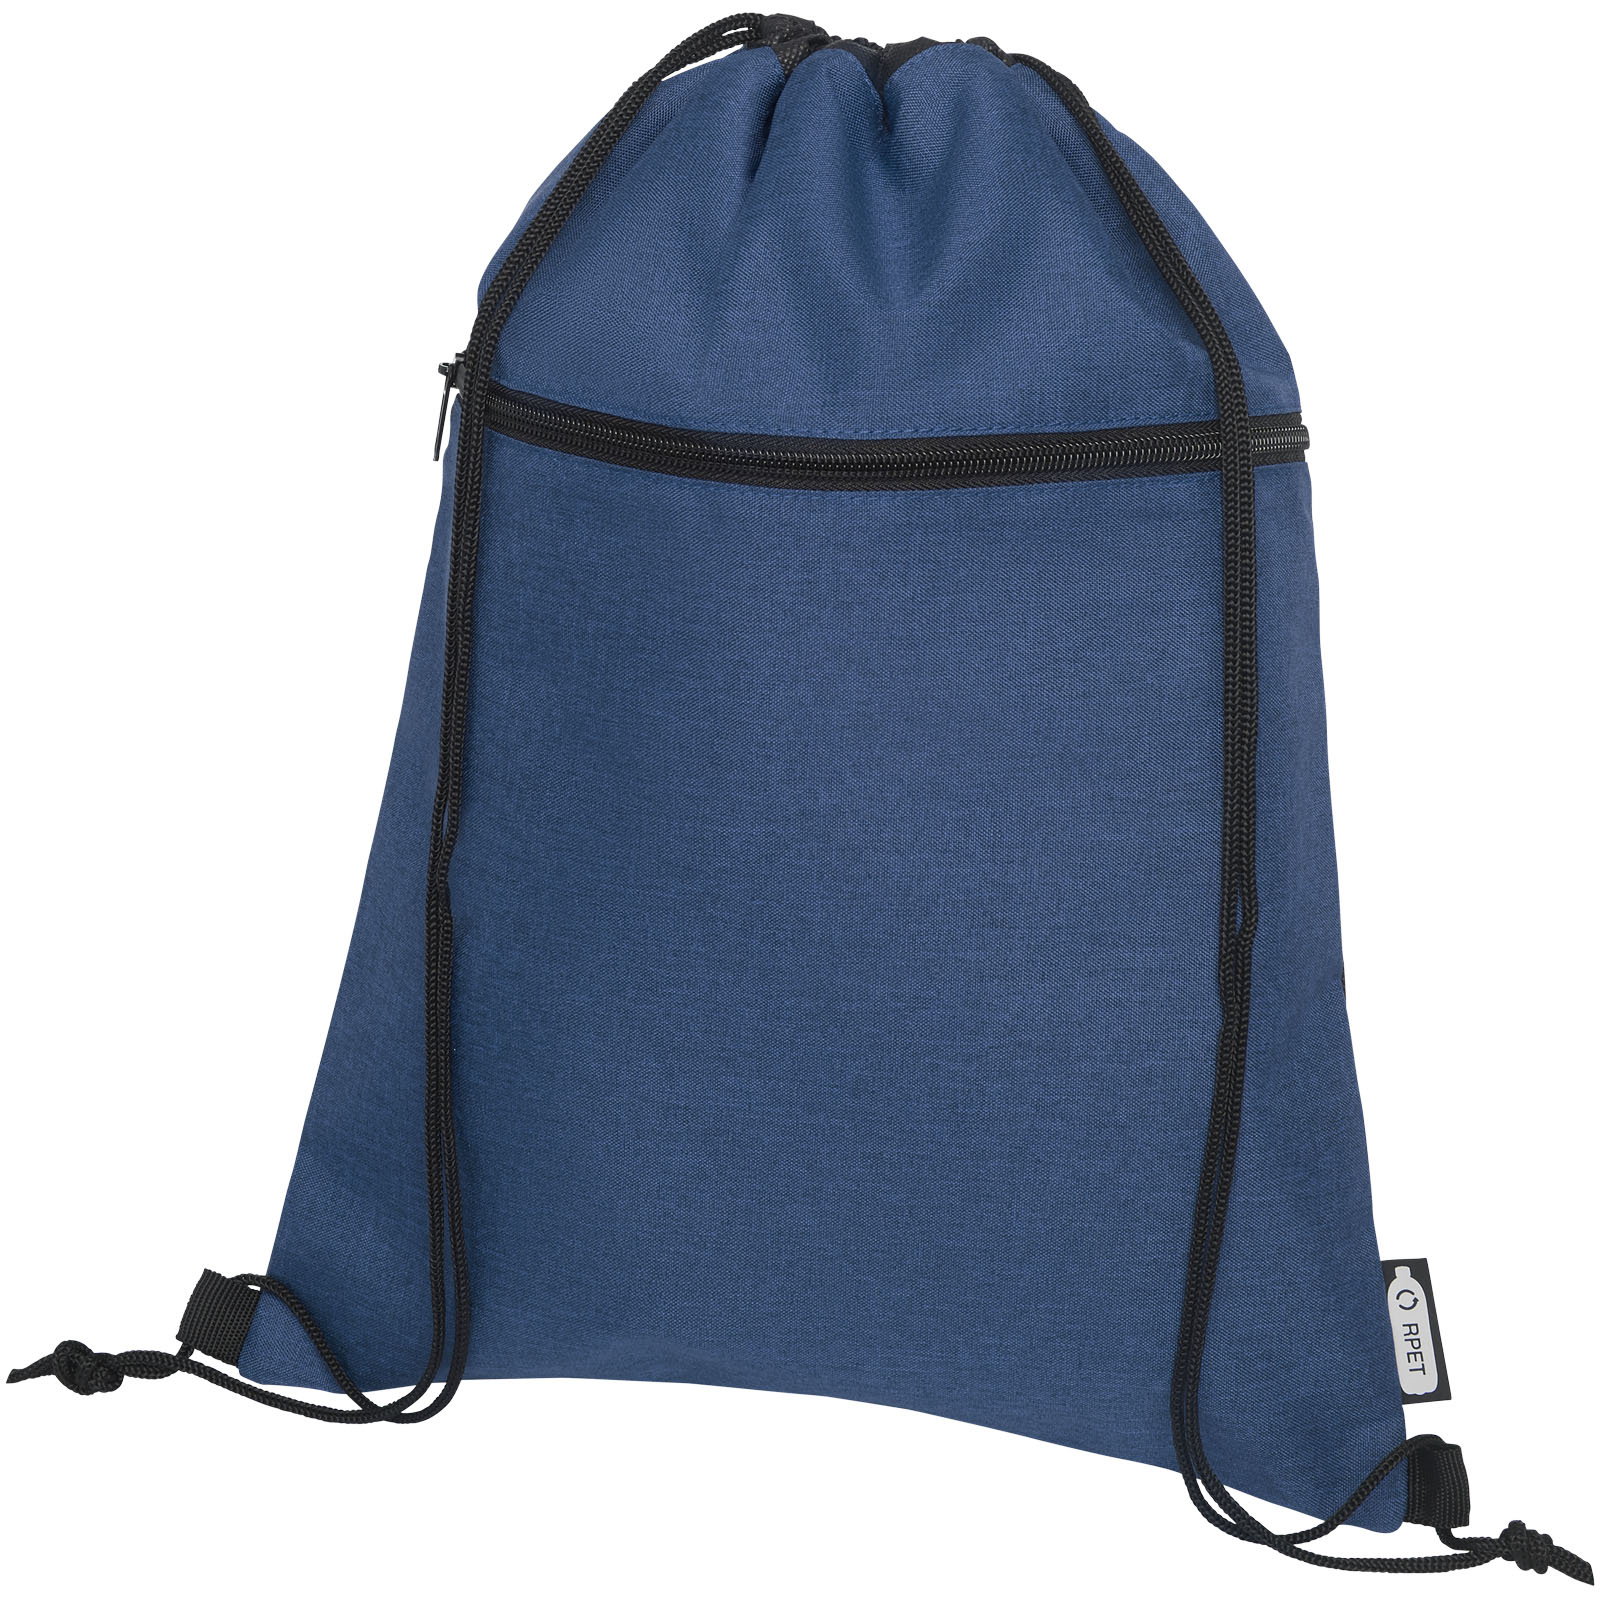 Drawstring backpack SOFT made of recycled material